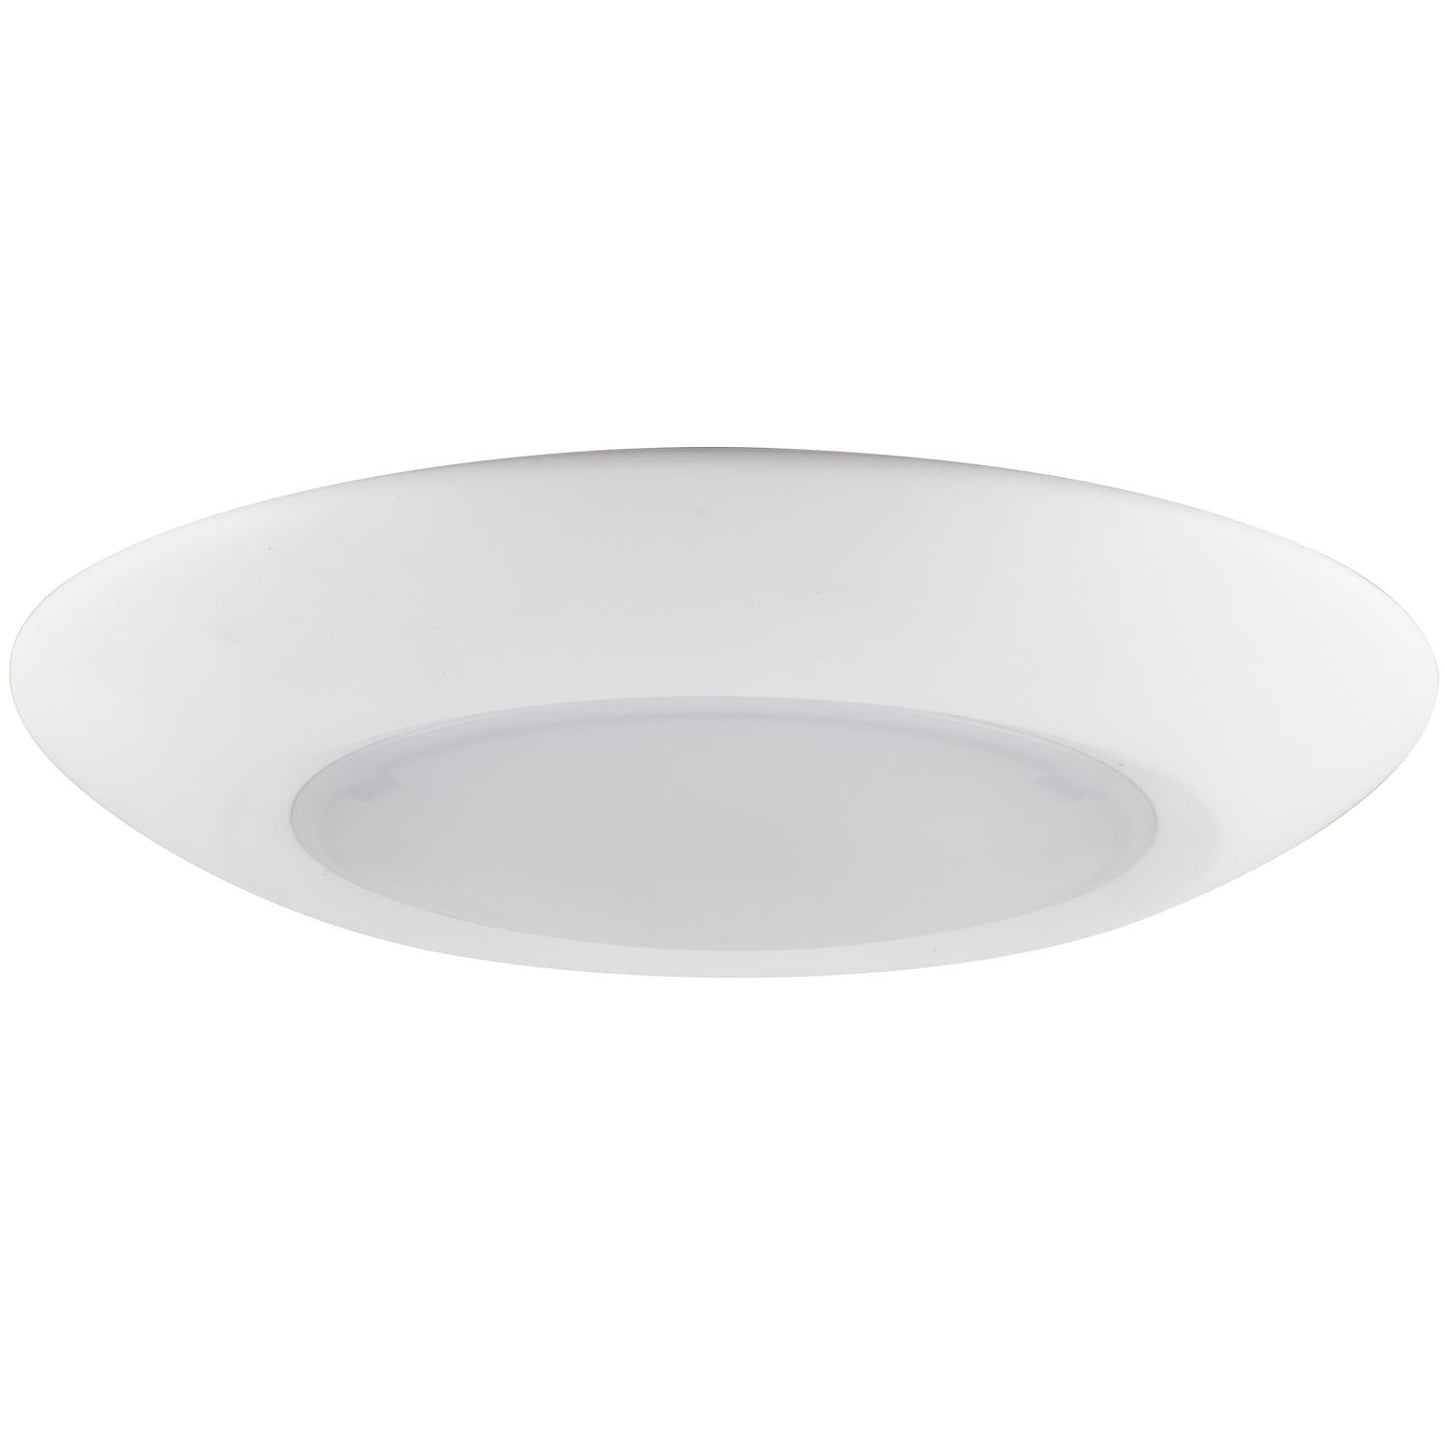 Sunlite 6-Inch Round LED Mini Flat Panel Fixture, 15 Watts (60W Equivalent), 120 Volts, Color Tunable (30K/40K/50K), 800 Lumens, Dimmable, 50,000 Hour Life Span, ETL Listed, White Finish